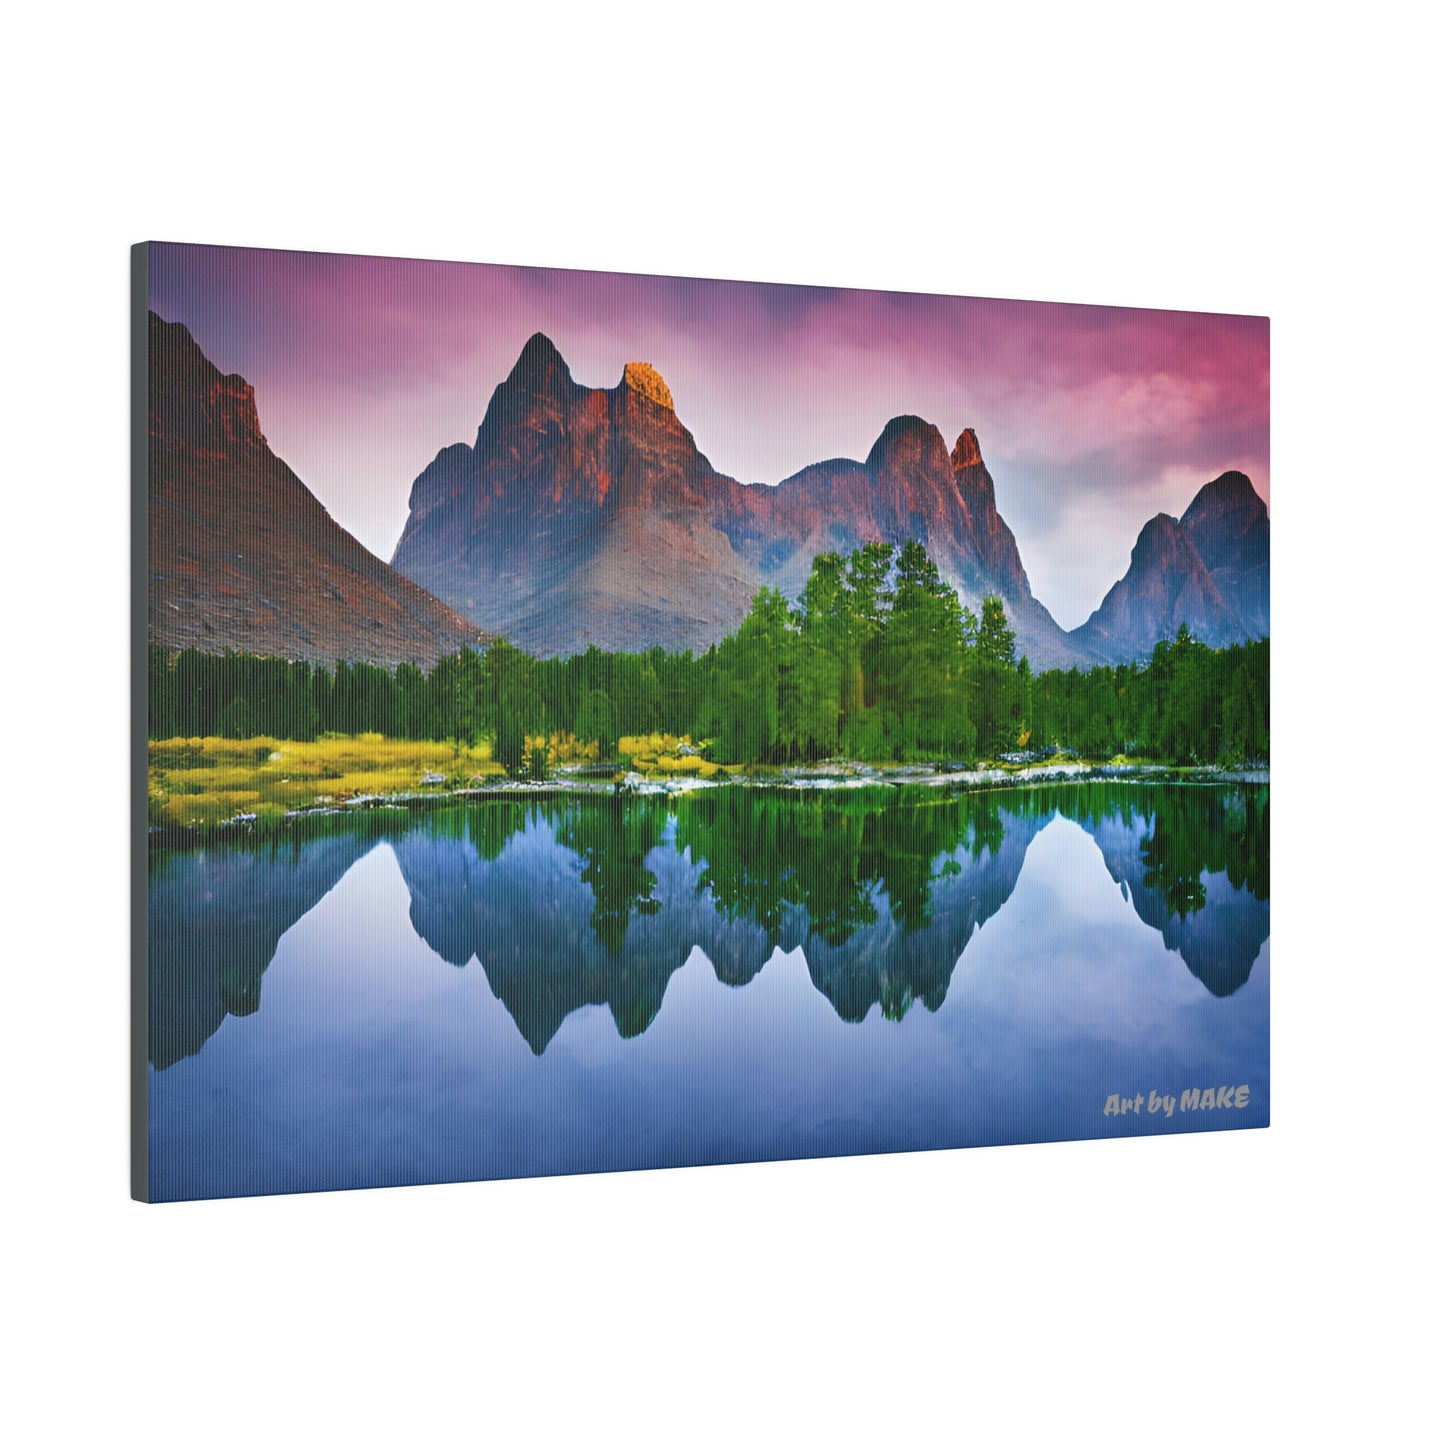 American Mountains 4 - 24"x16" Matte Canvas, Stretched, 0.75"